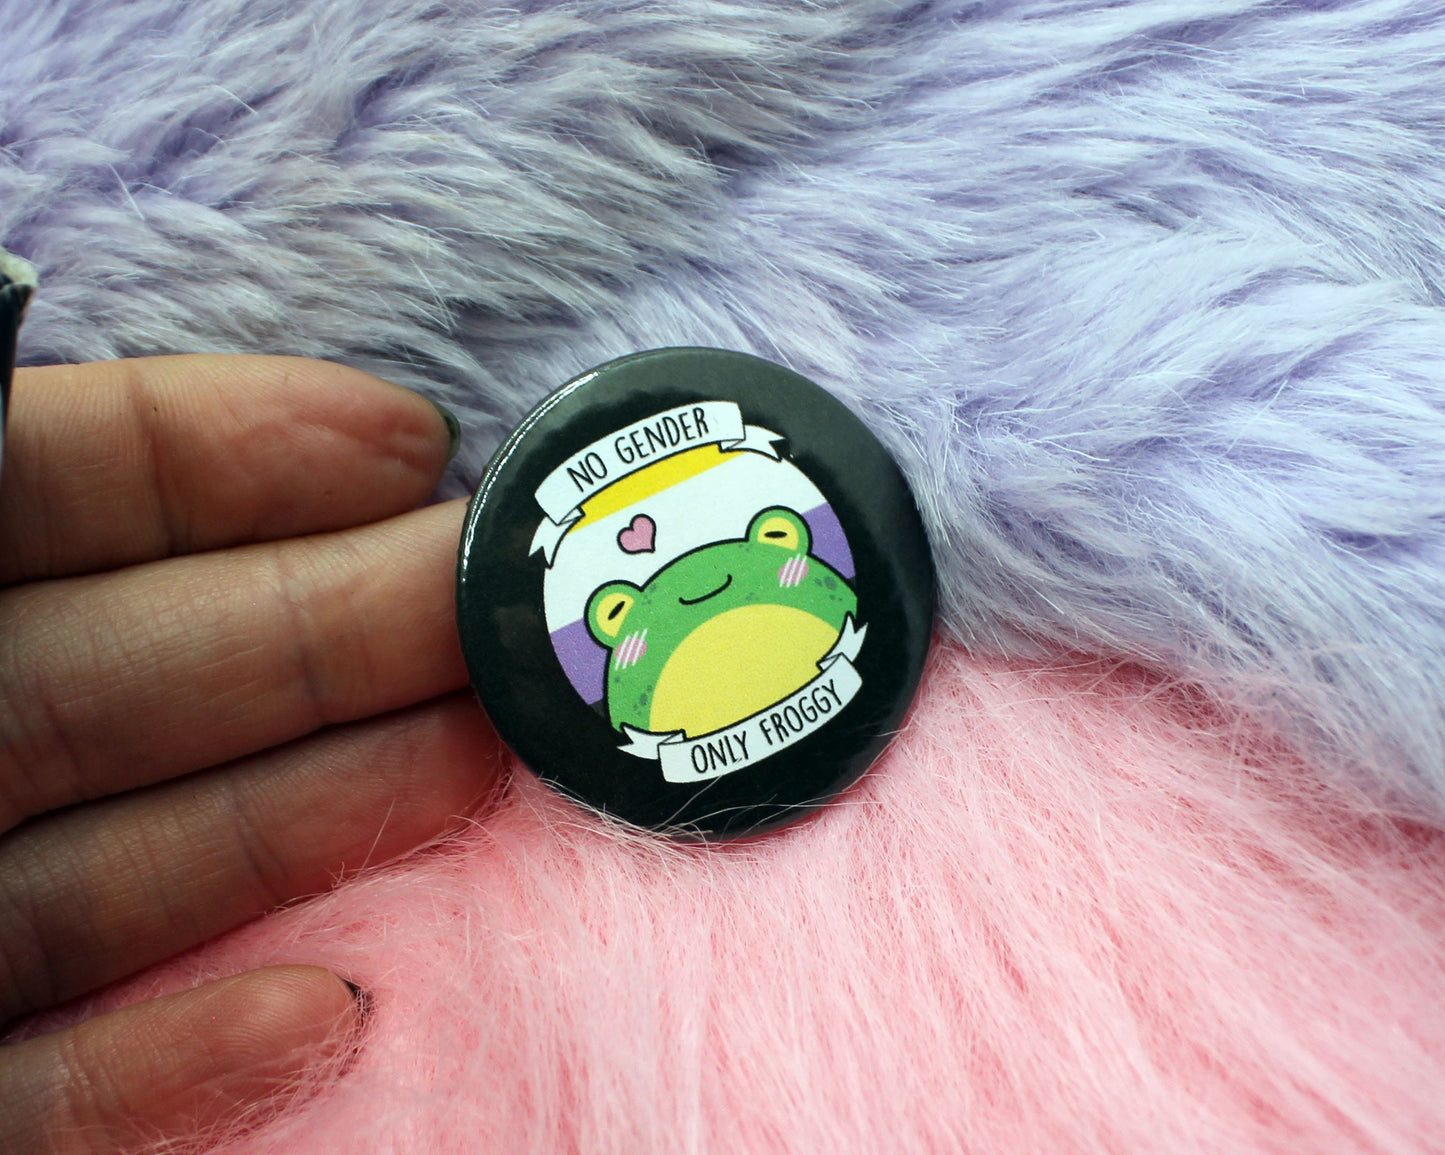 No Gender Only Froggy Badge (38mm) - Non-Binary frog toad pride flag badge